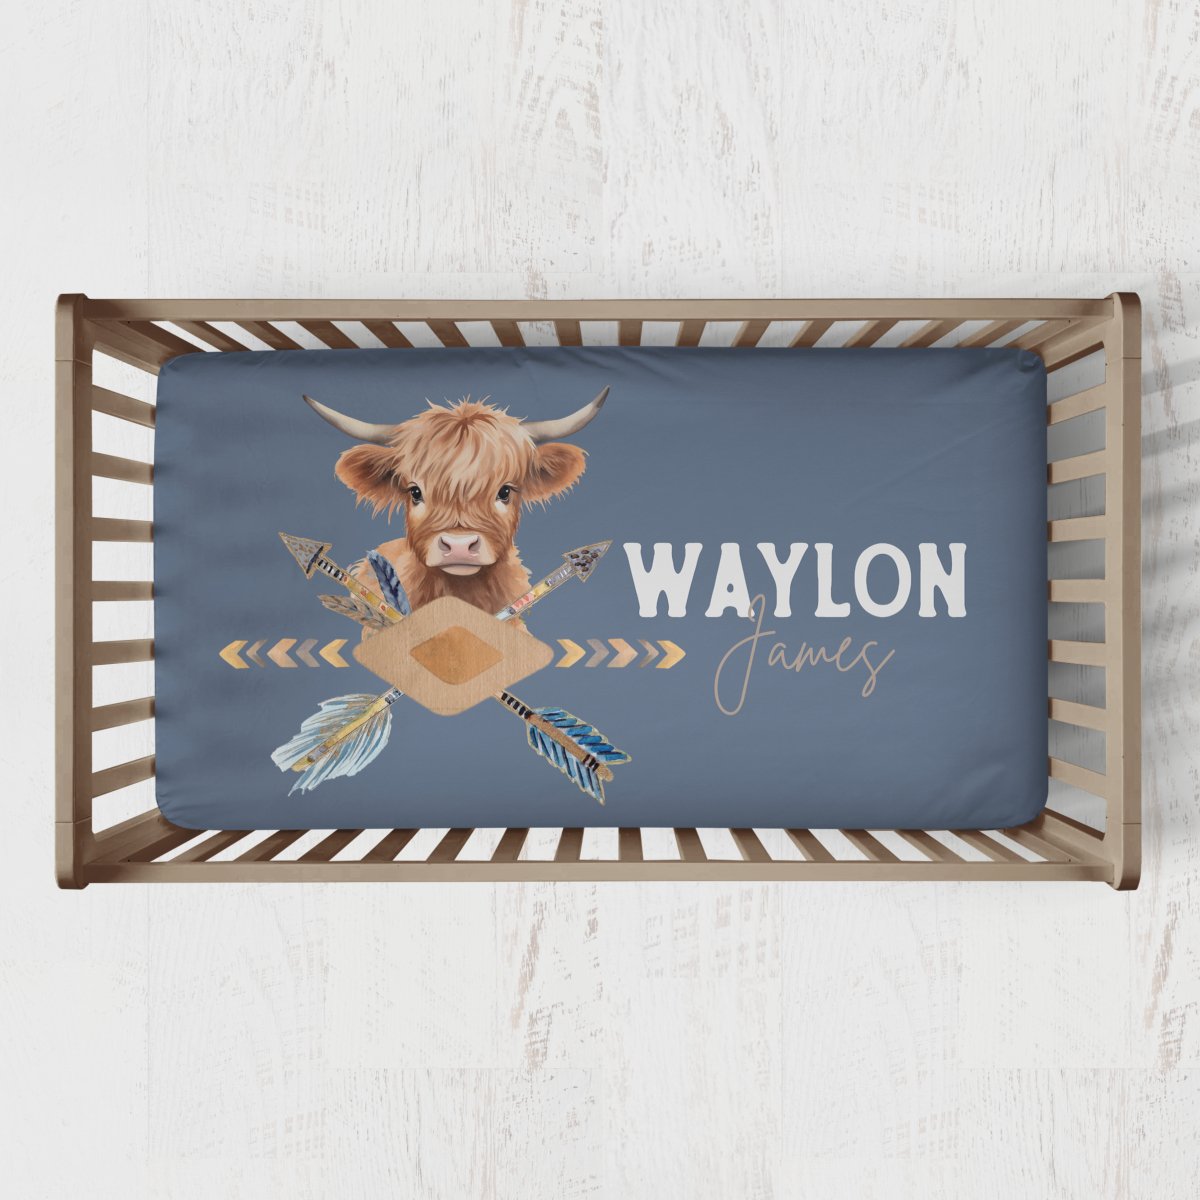 Blue Highland Cow Personalized Crib Sheet - gender_boy, Personalized_Yes, text